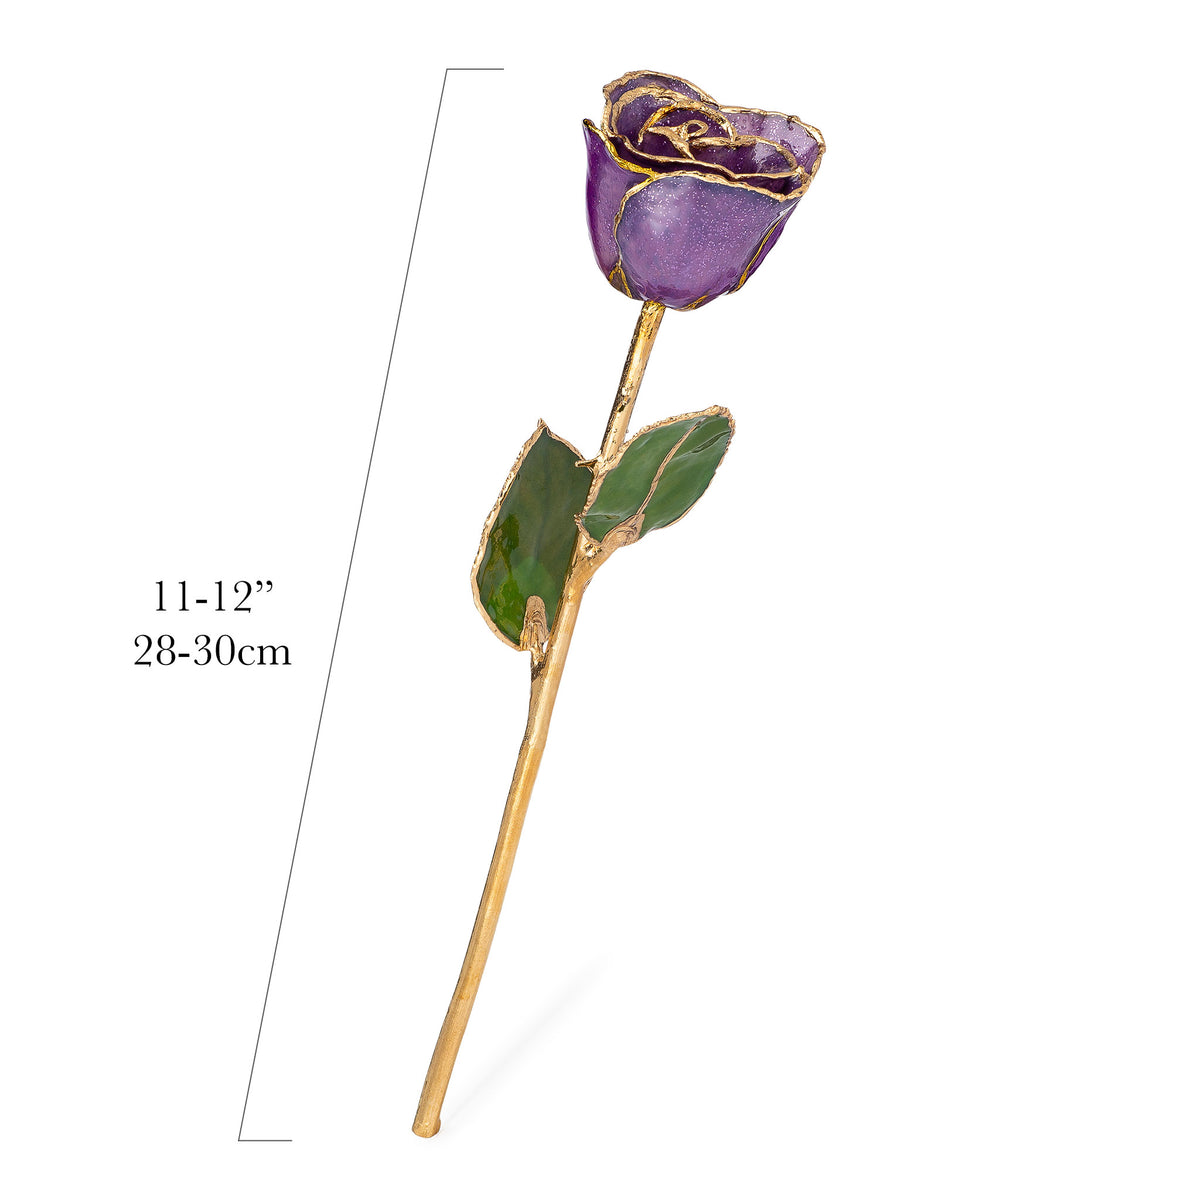 24K Gold Trimmed Forever Rose with Amethyst (purple color) with sparkles suspended in the finish. View of Stem, Leaves, and Rose Petals and Showing Detail of Gold. Shows measurements.